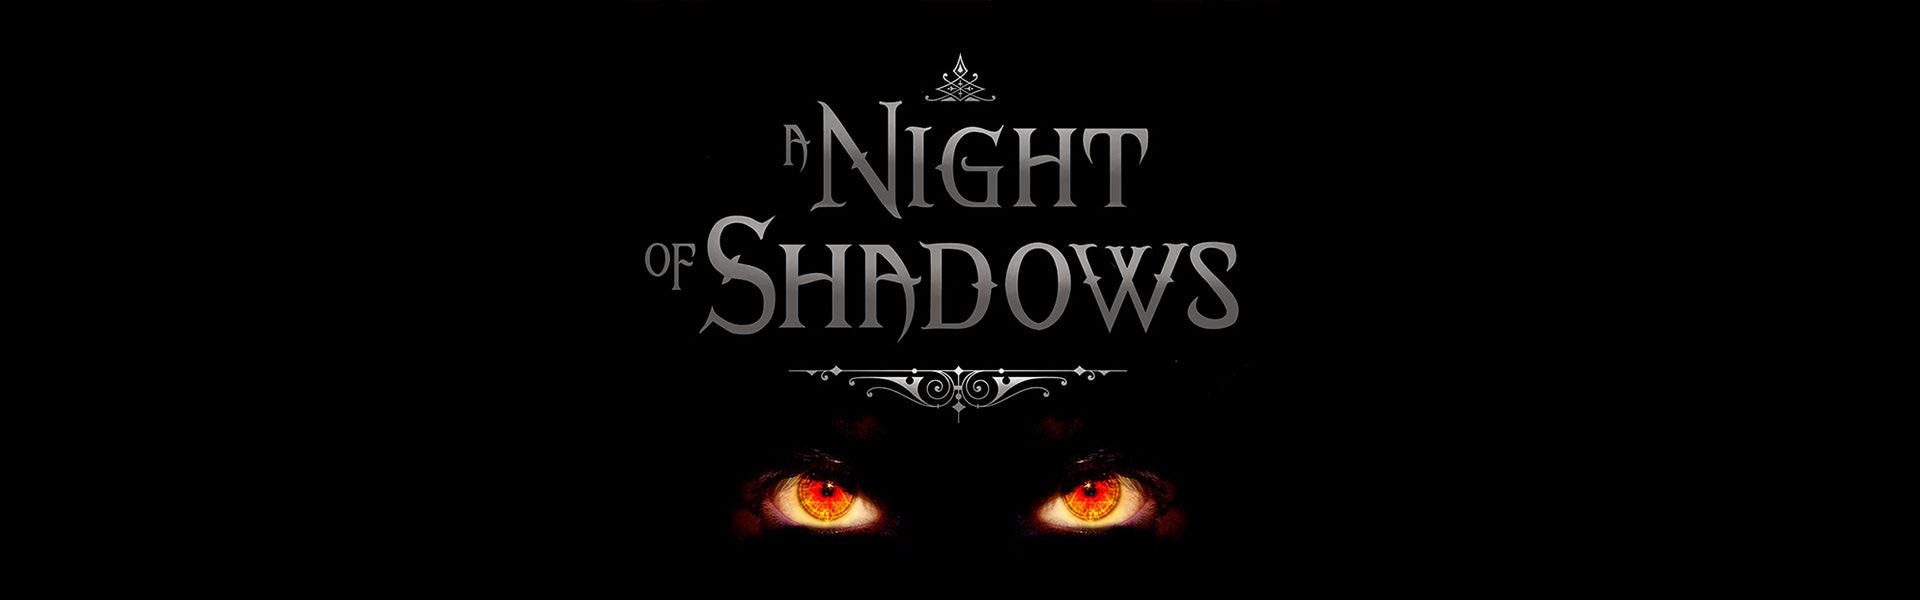 A Night of Shadows Cover